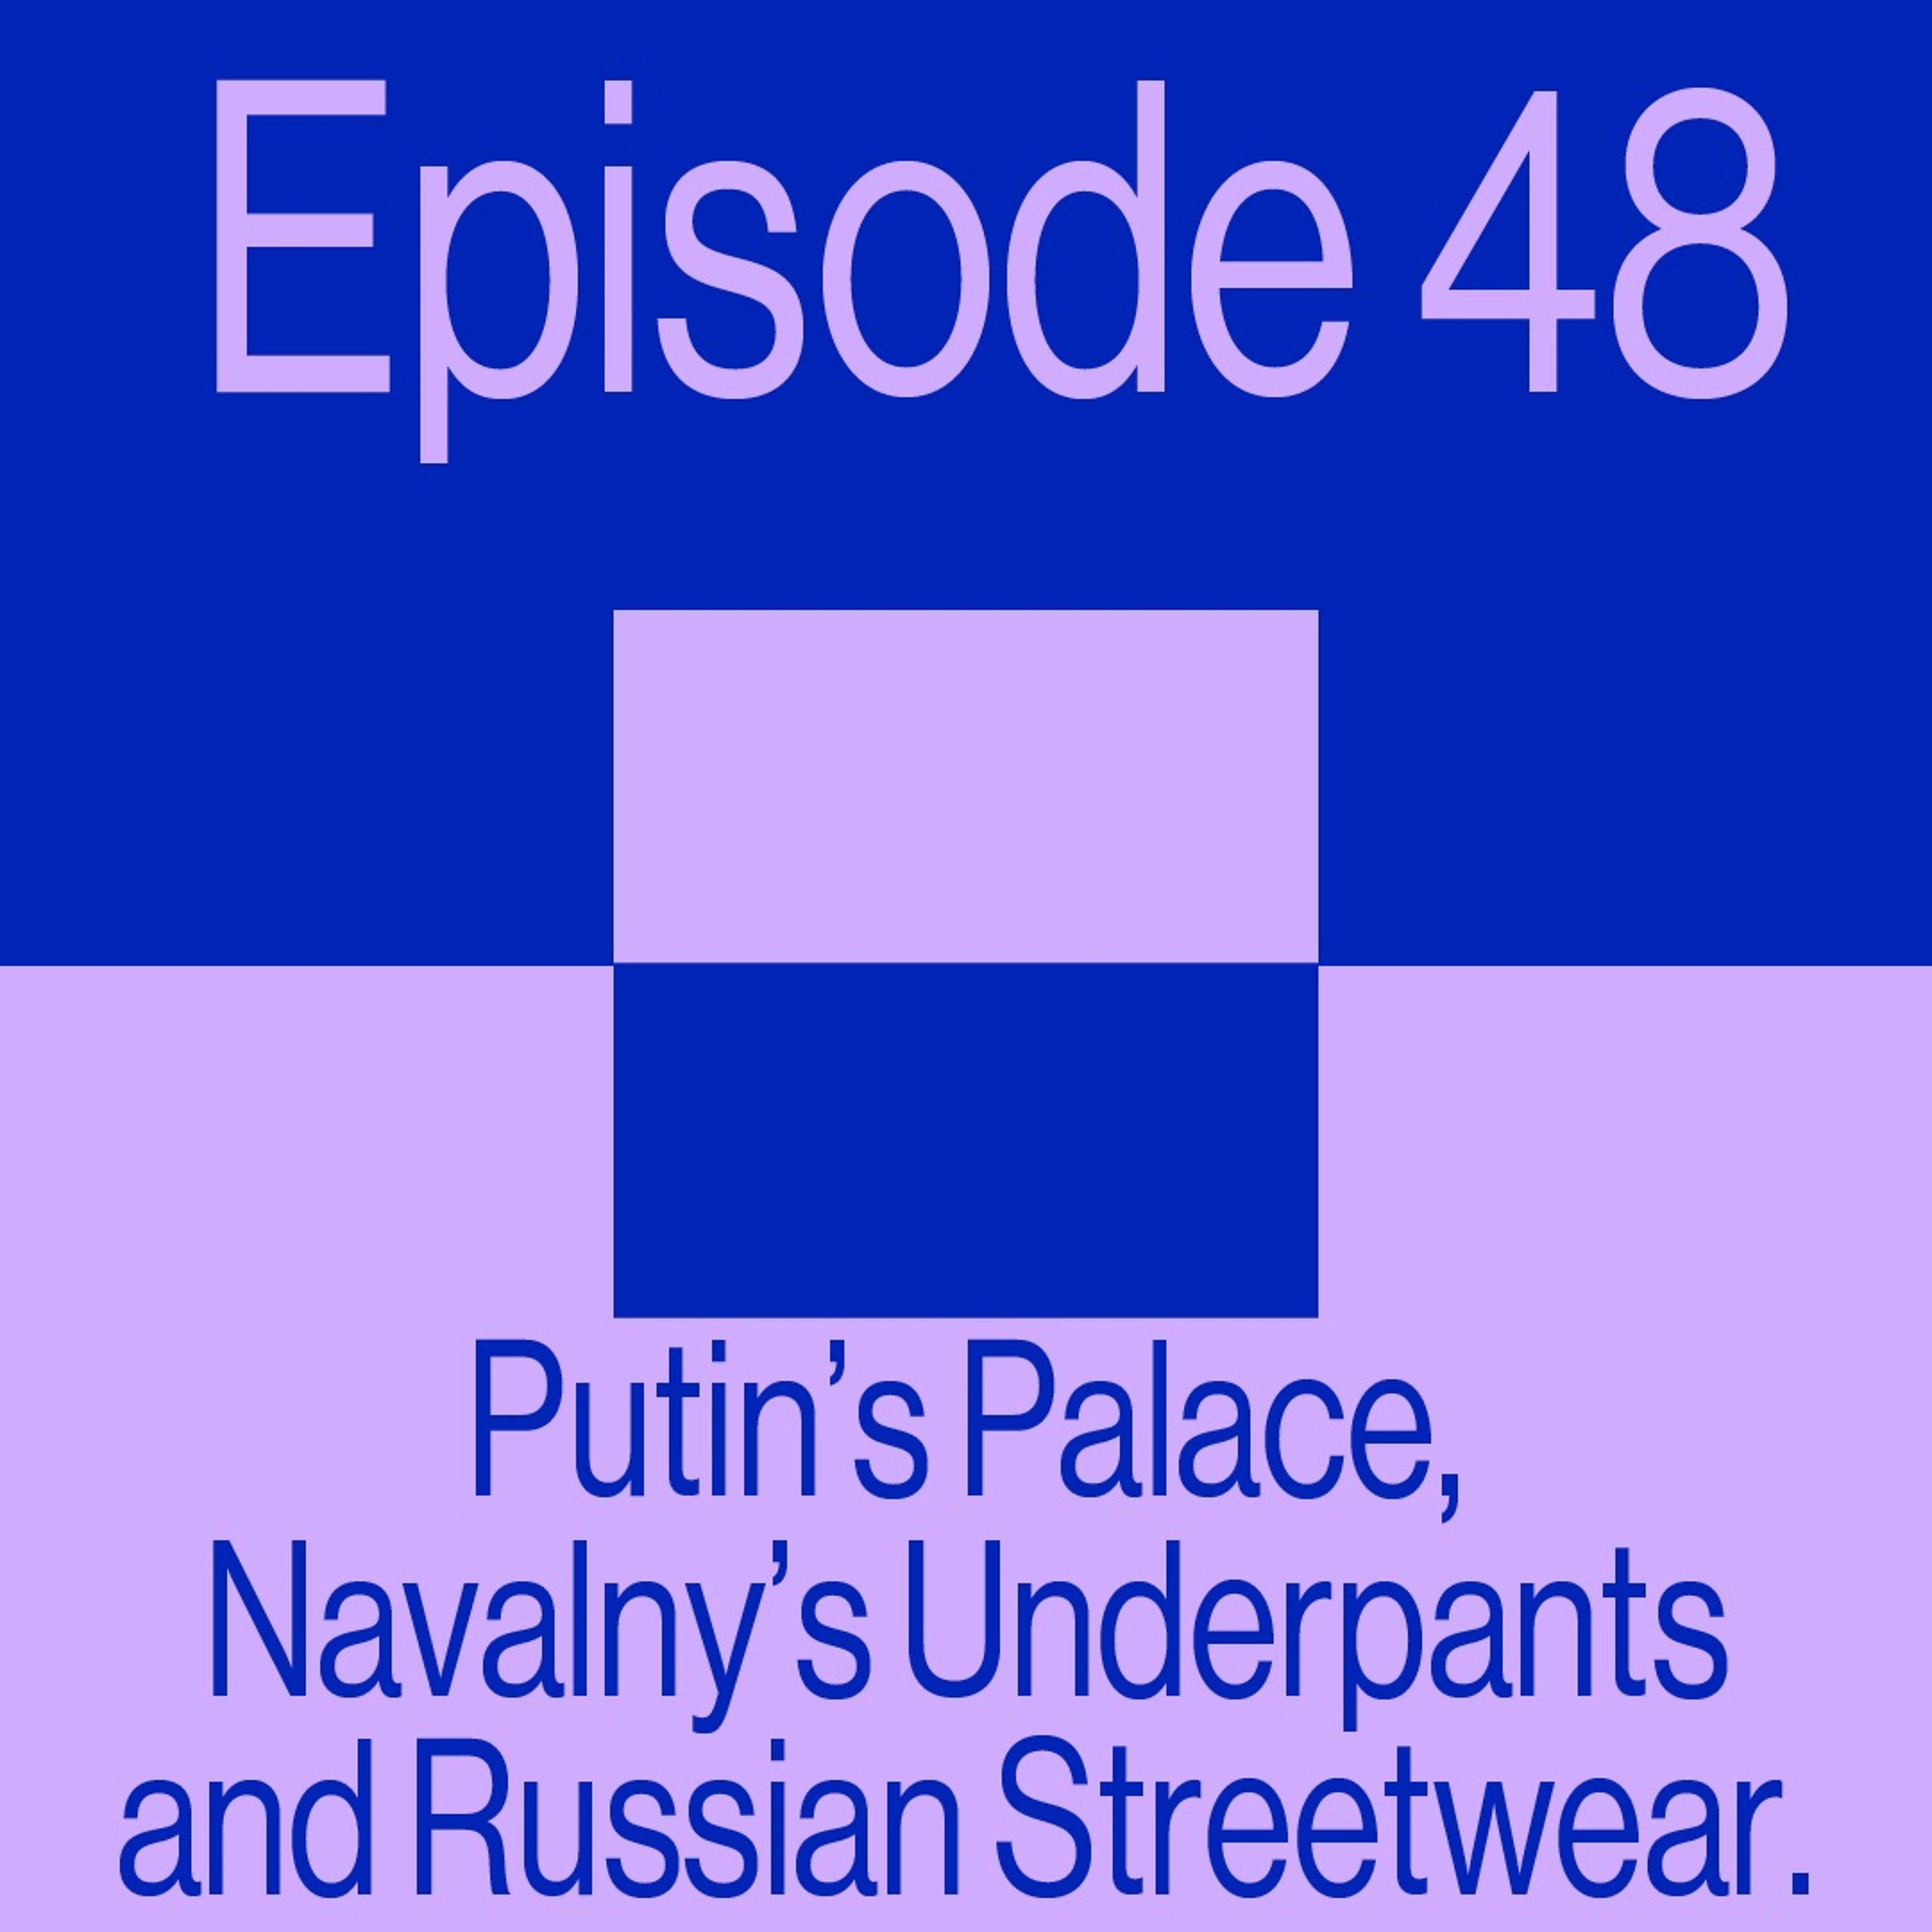 Episode 48: Putin's Palace, Navalny's Underpants, and Russian Streetwear